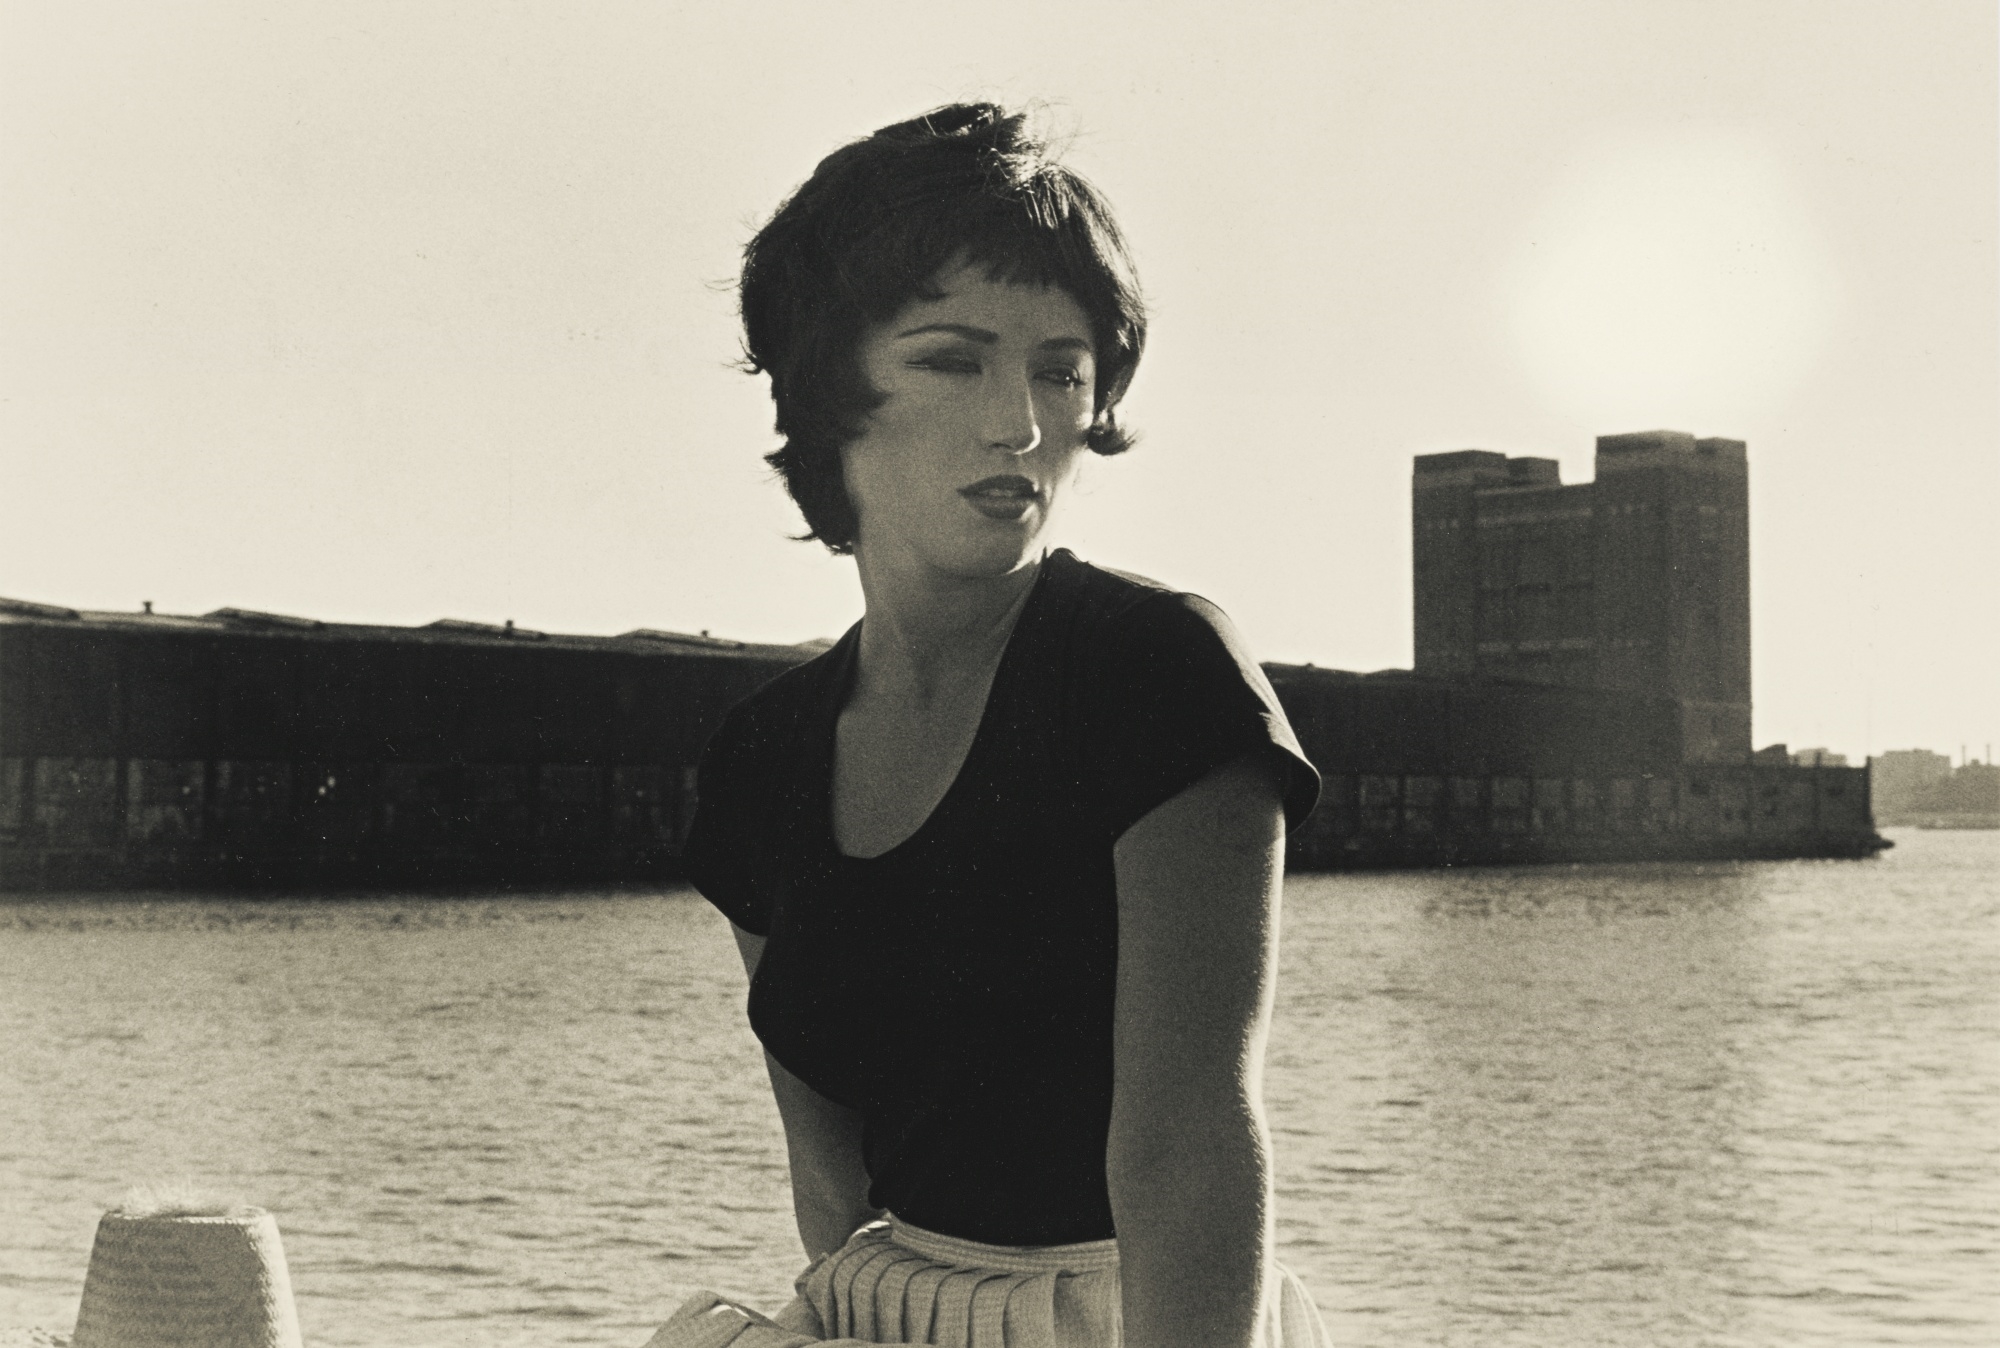 Cindy Sherman's 'Untitled Film Stills' Go to Auction - The New